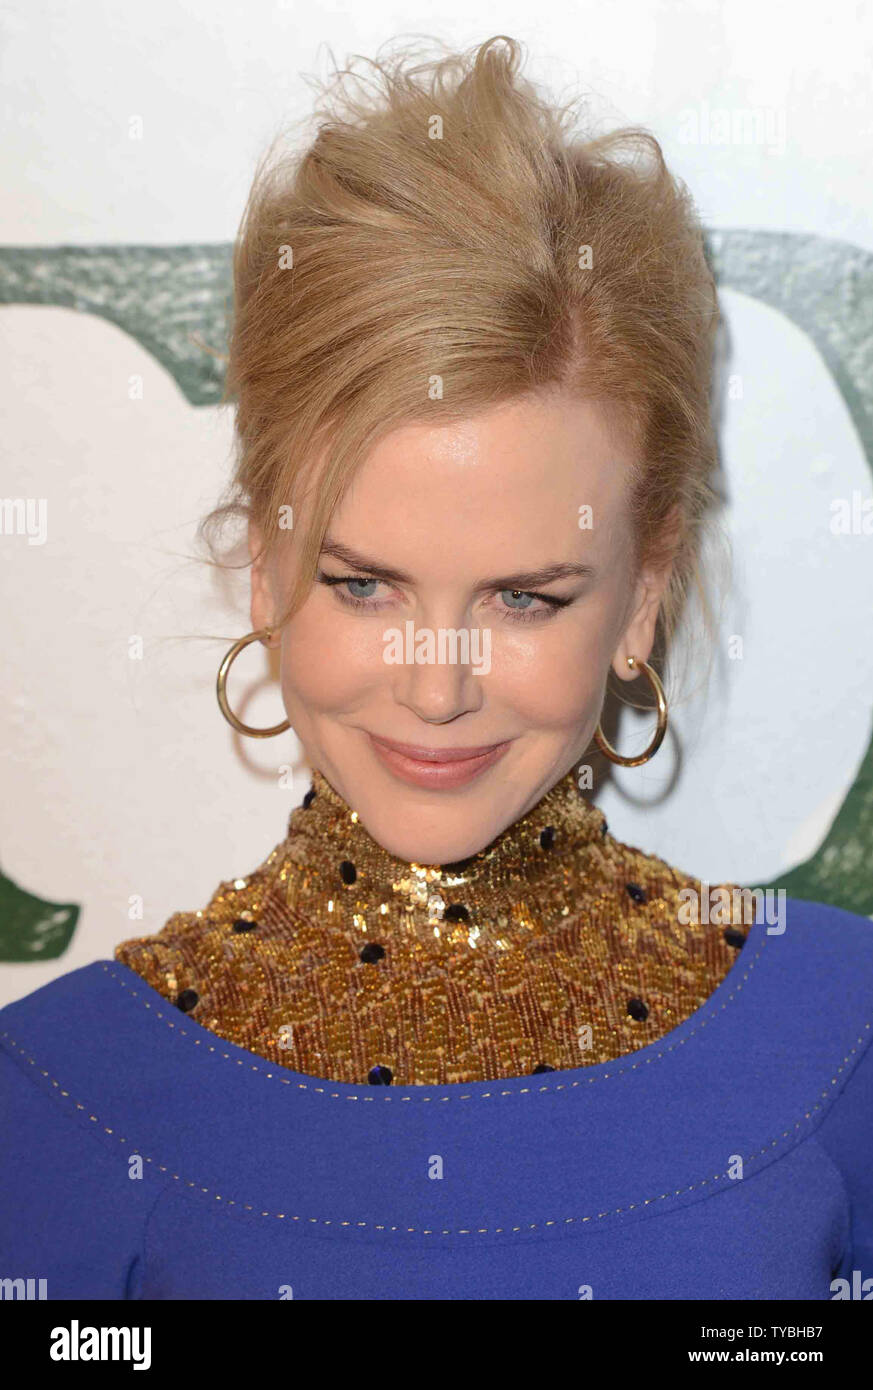 Australian actress Nicole Kidman attends a special screening of 'Stoker' at The Curzon Soho in London on February 17, 2013.     UPI/Paul Treadway Stock Photo